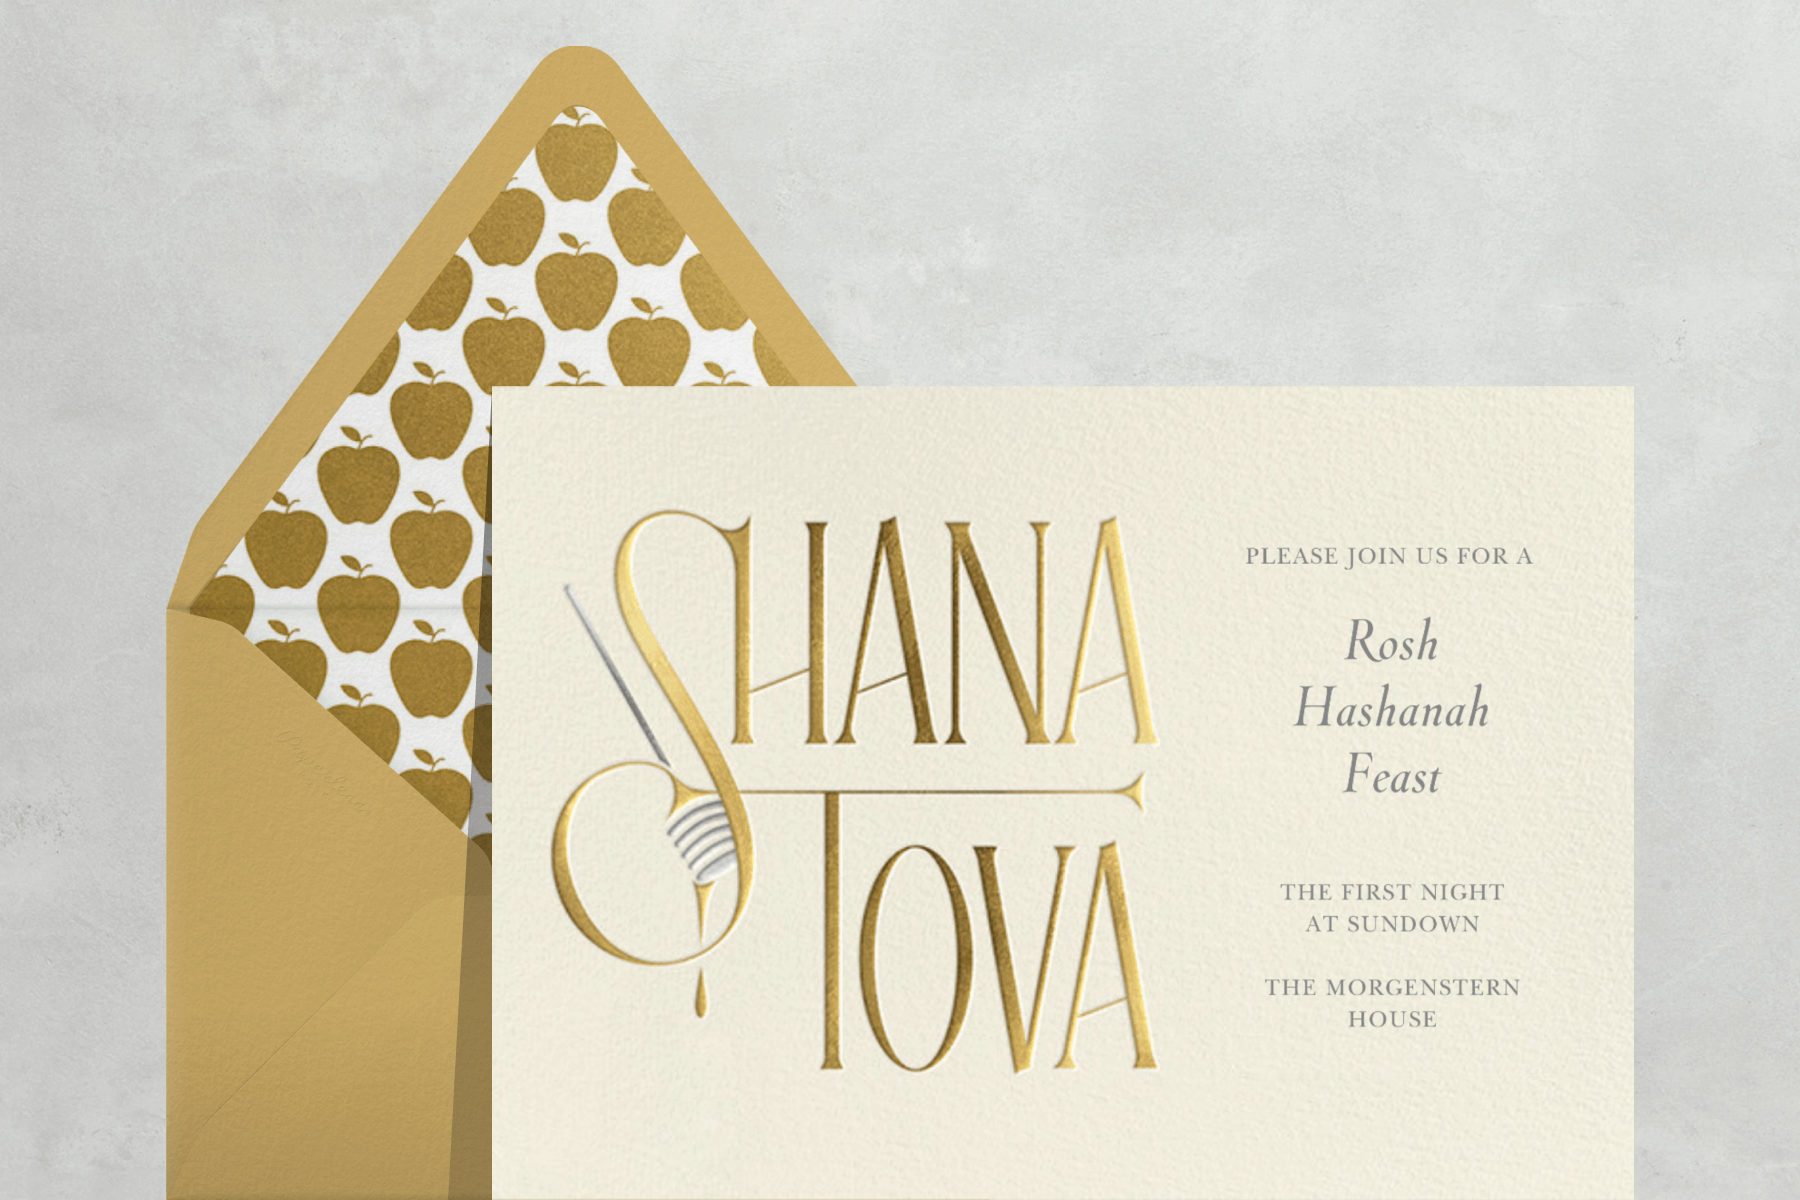 A Rosh Hashanah invitation with the words “Shana Tova” in gold and a honey dipper.